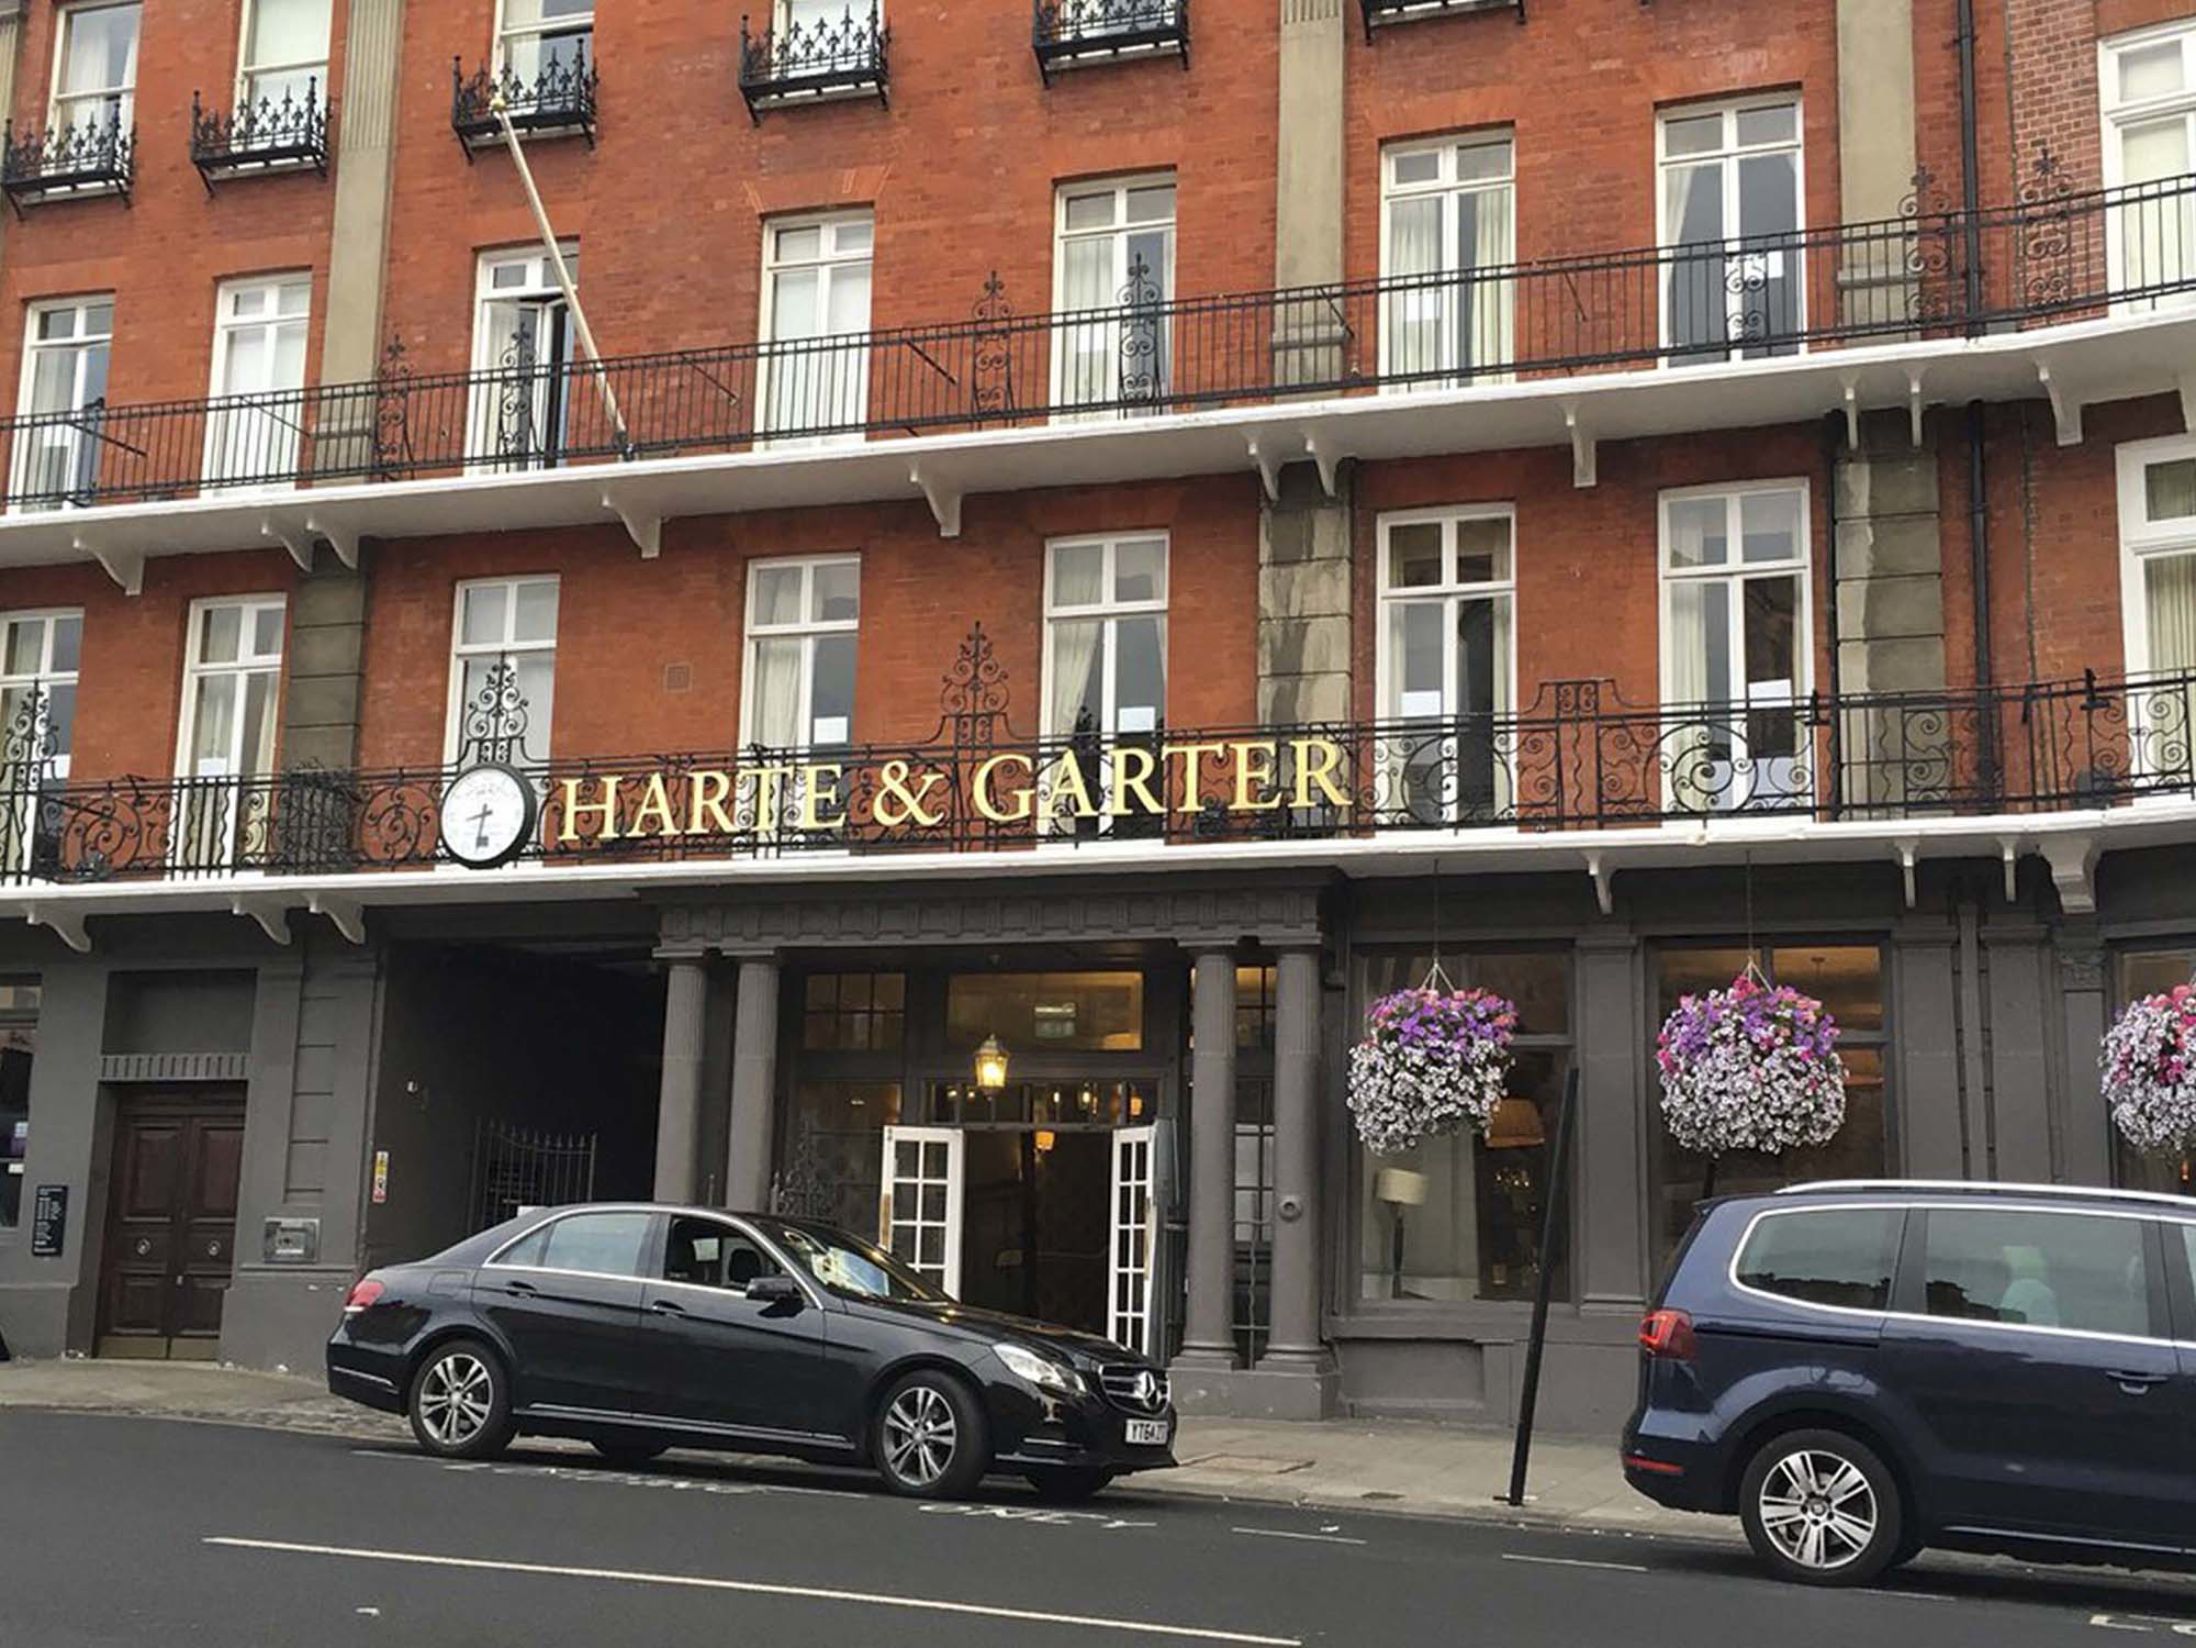 Cheap Hotels in Windsor - Clarion Collection Harte and Garter Hotel & Spa